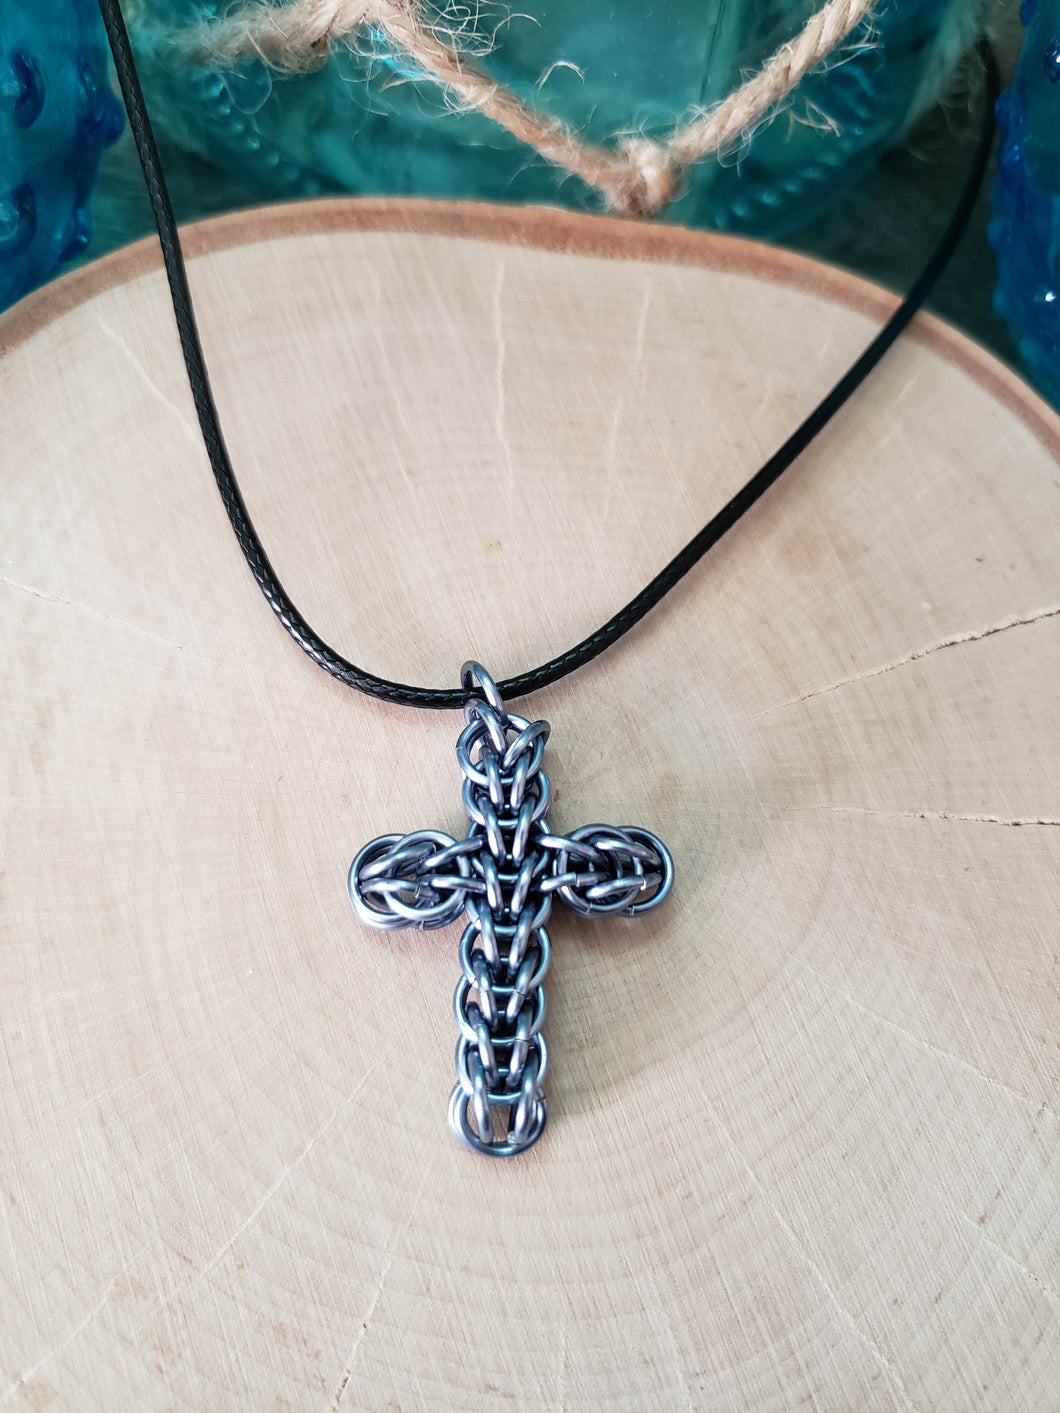 Gunmetal Chainmaille FullPersian Cross Necklace